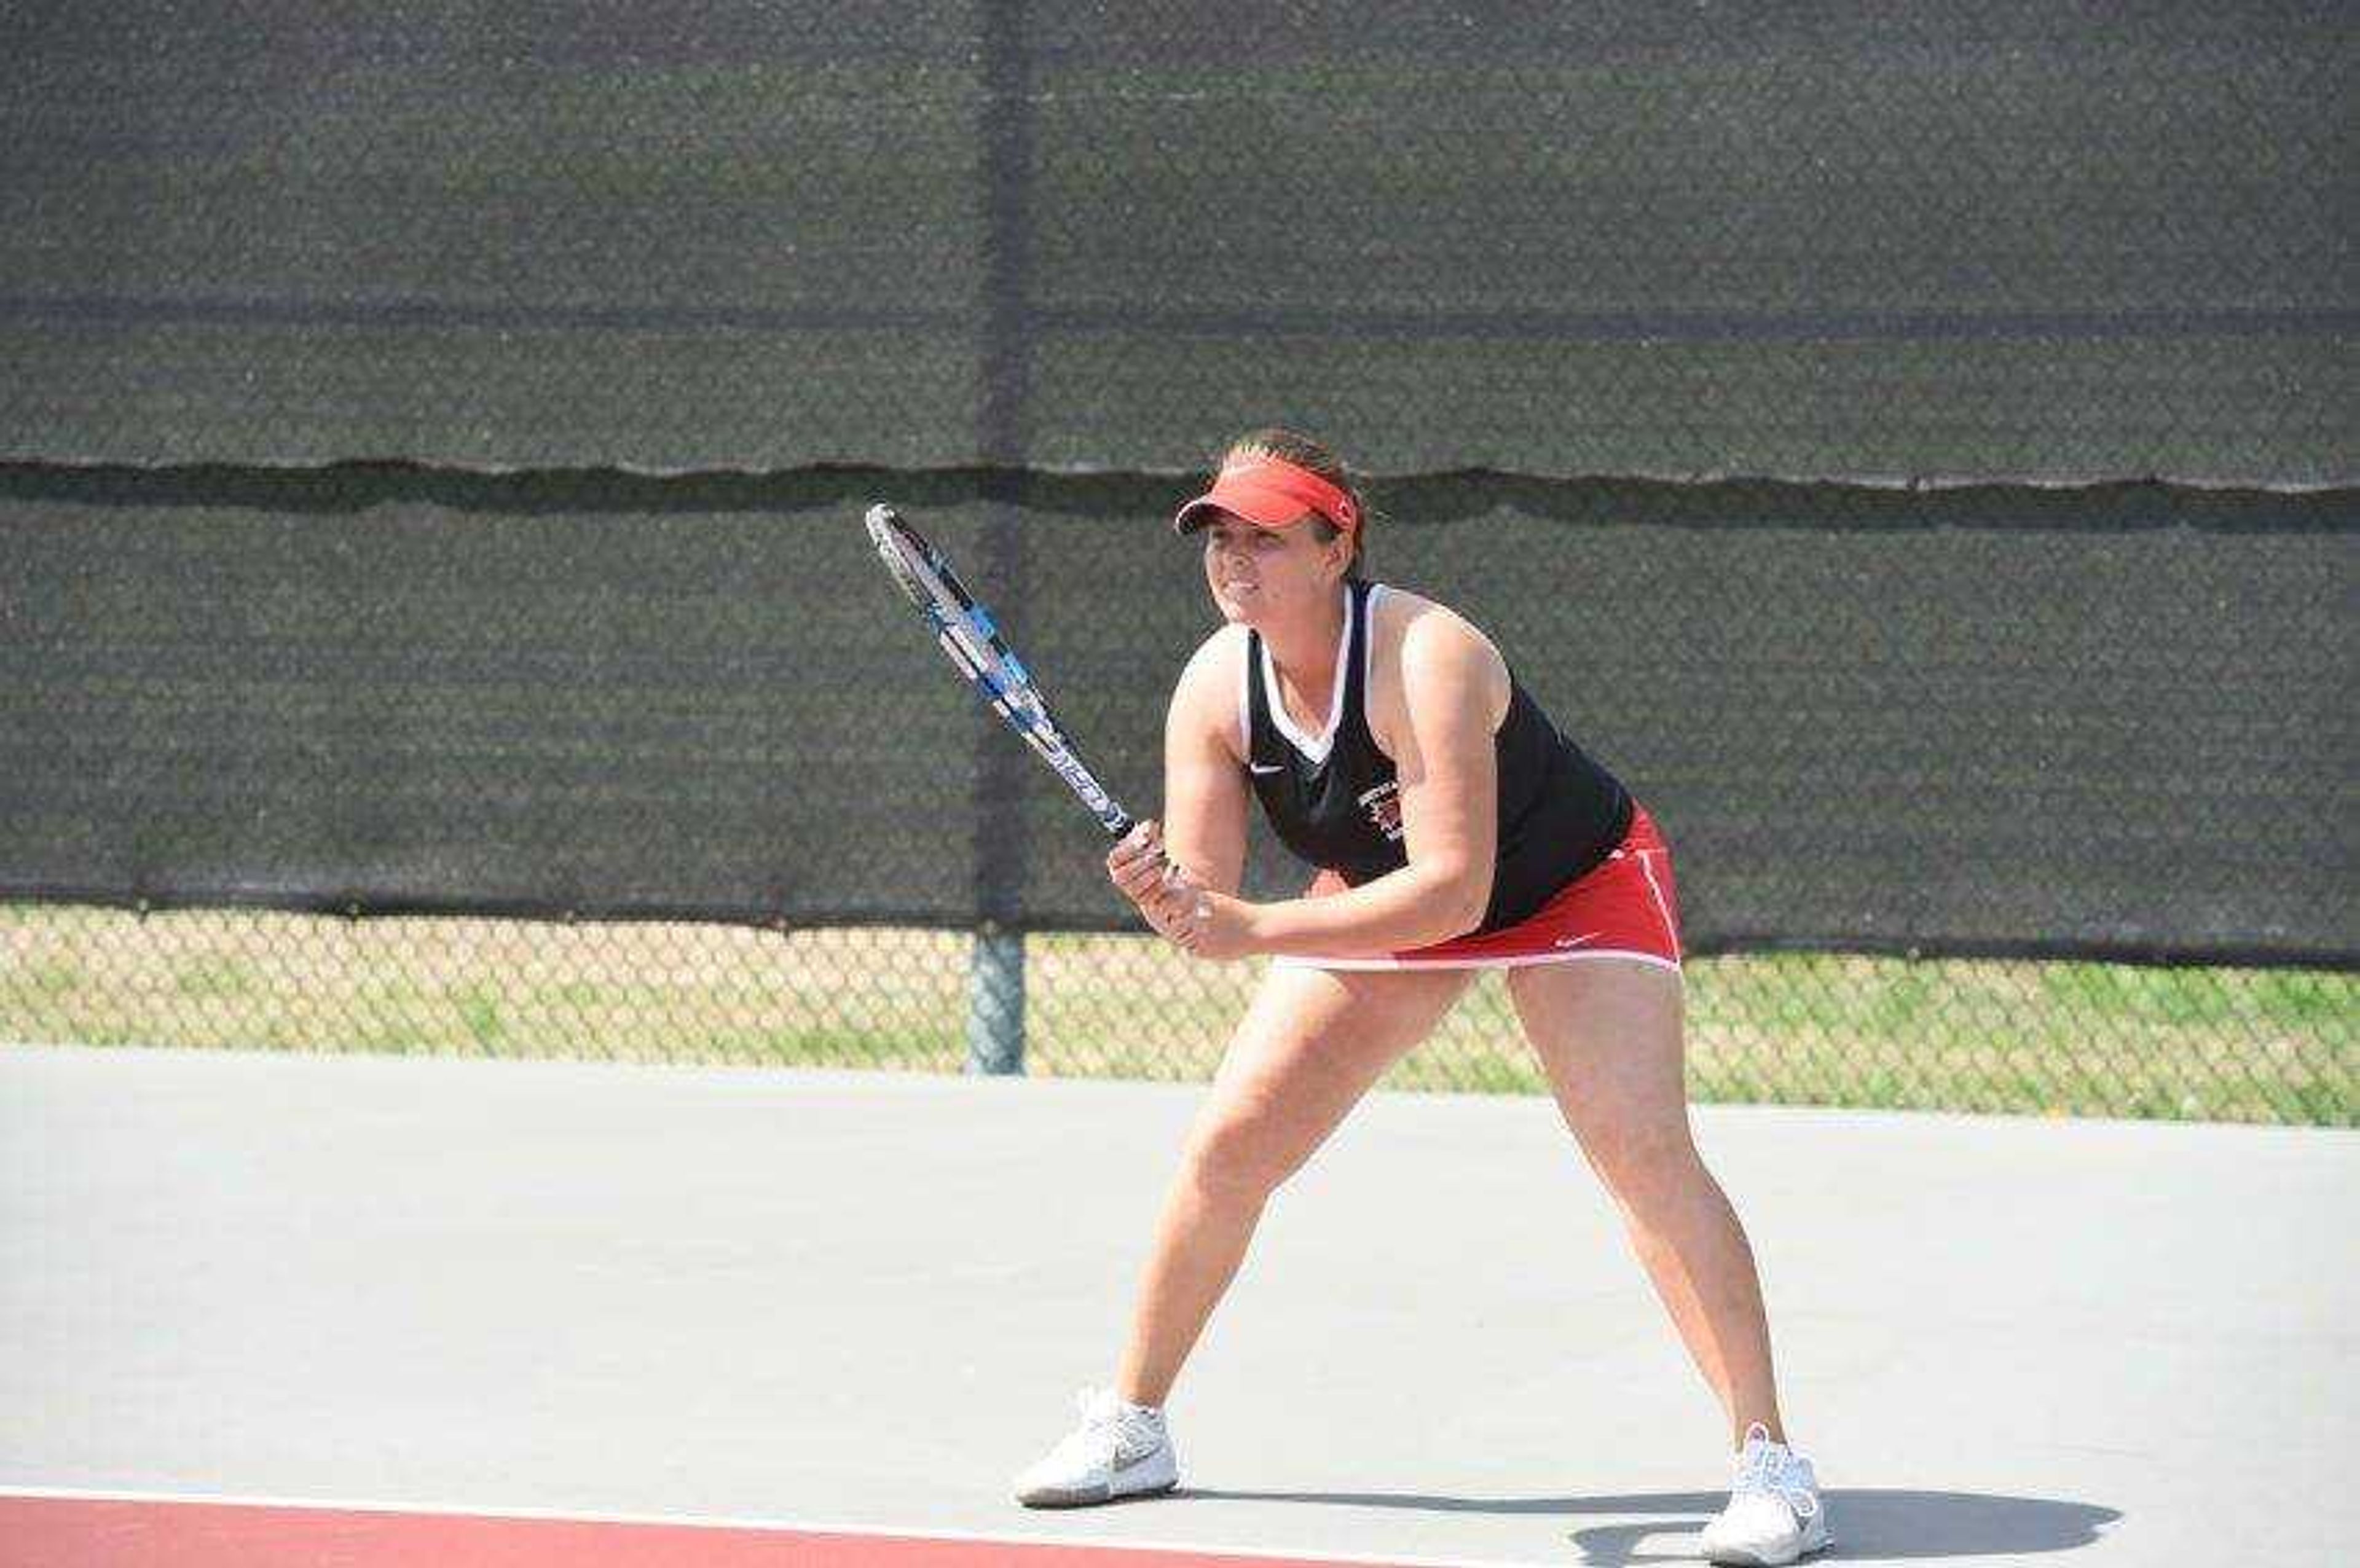 Southeast's tennis team competes in post-season for the first time in 10 years